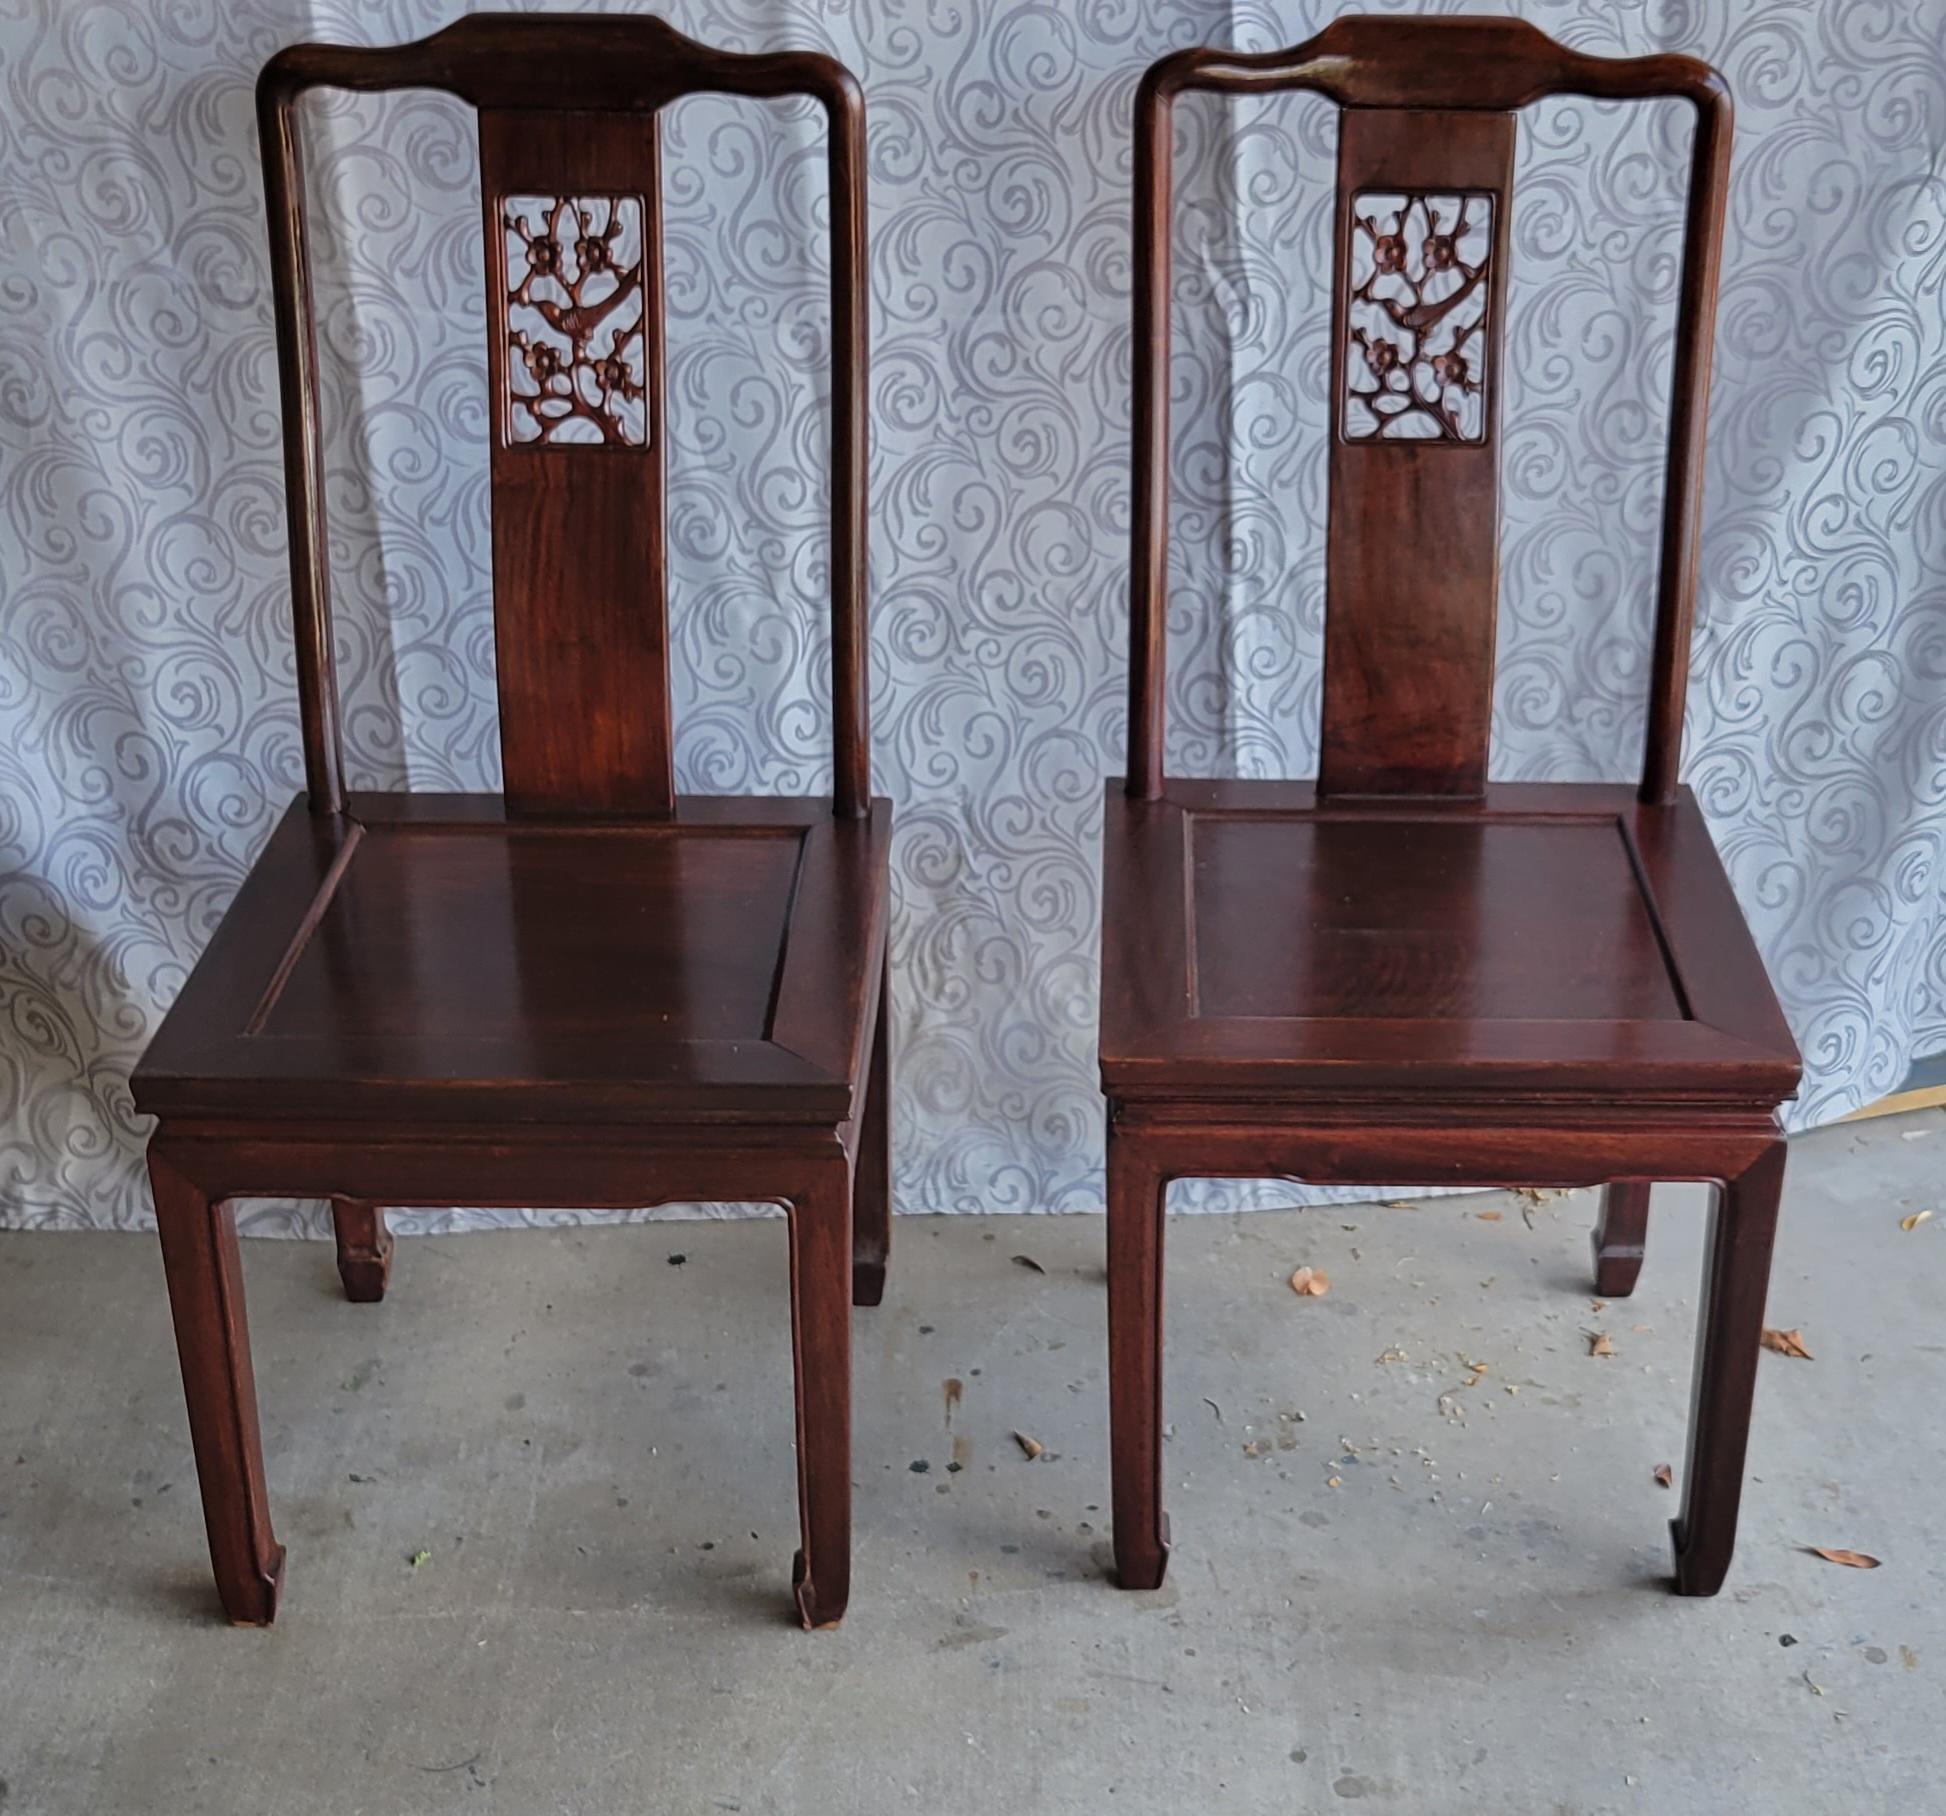 Vintage George Zee and Co. Mahogany Side Chairs - set of 2 For Sale 5